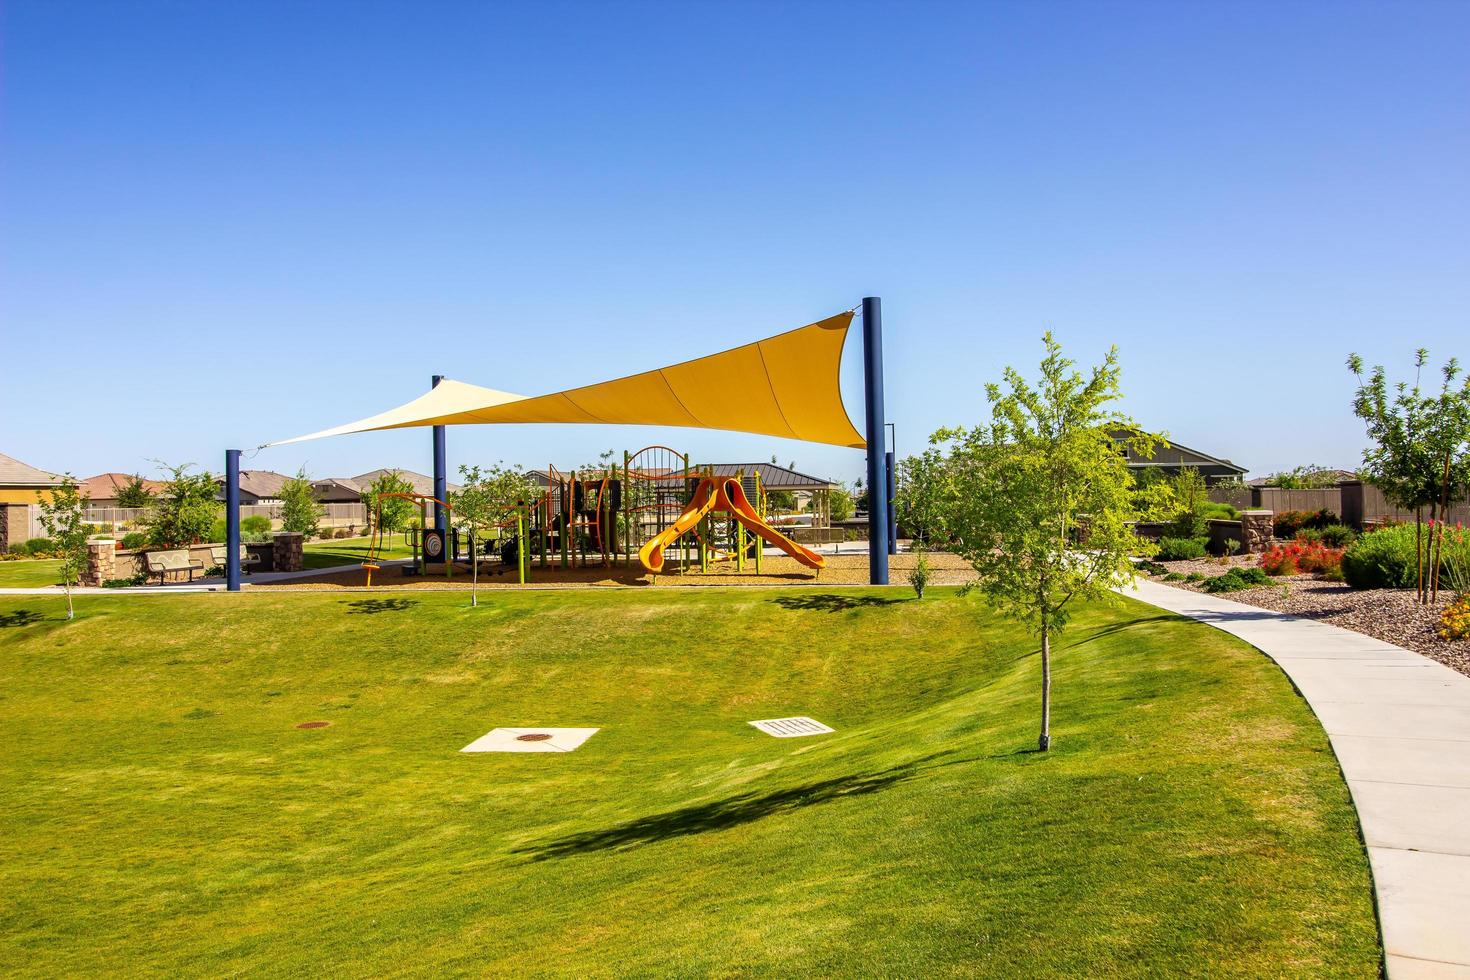 Housing Development Jungle Gym With Shade Canopy photo